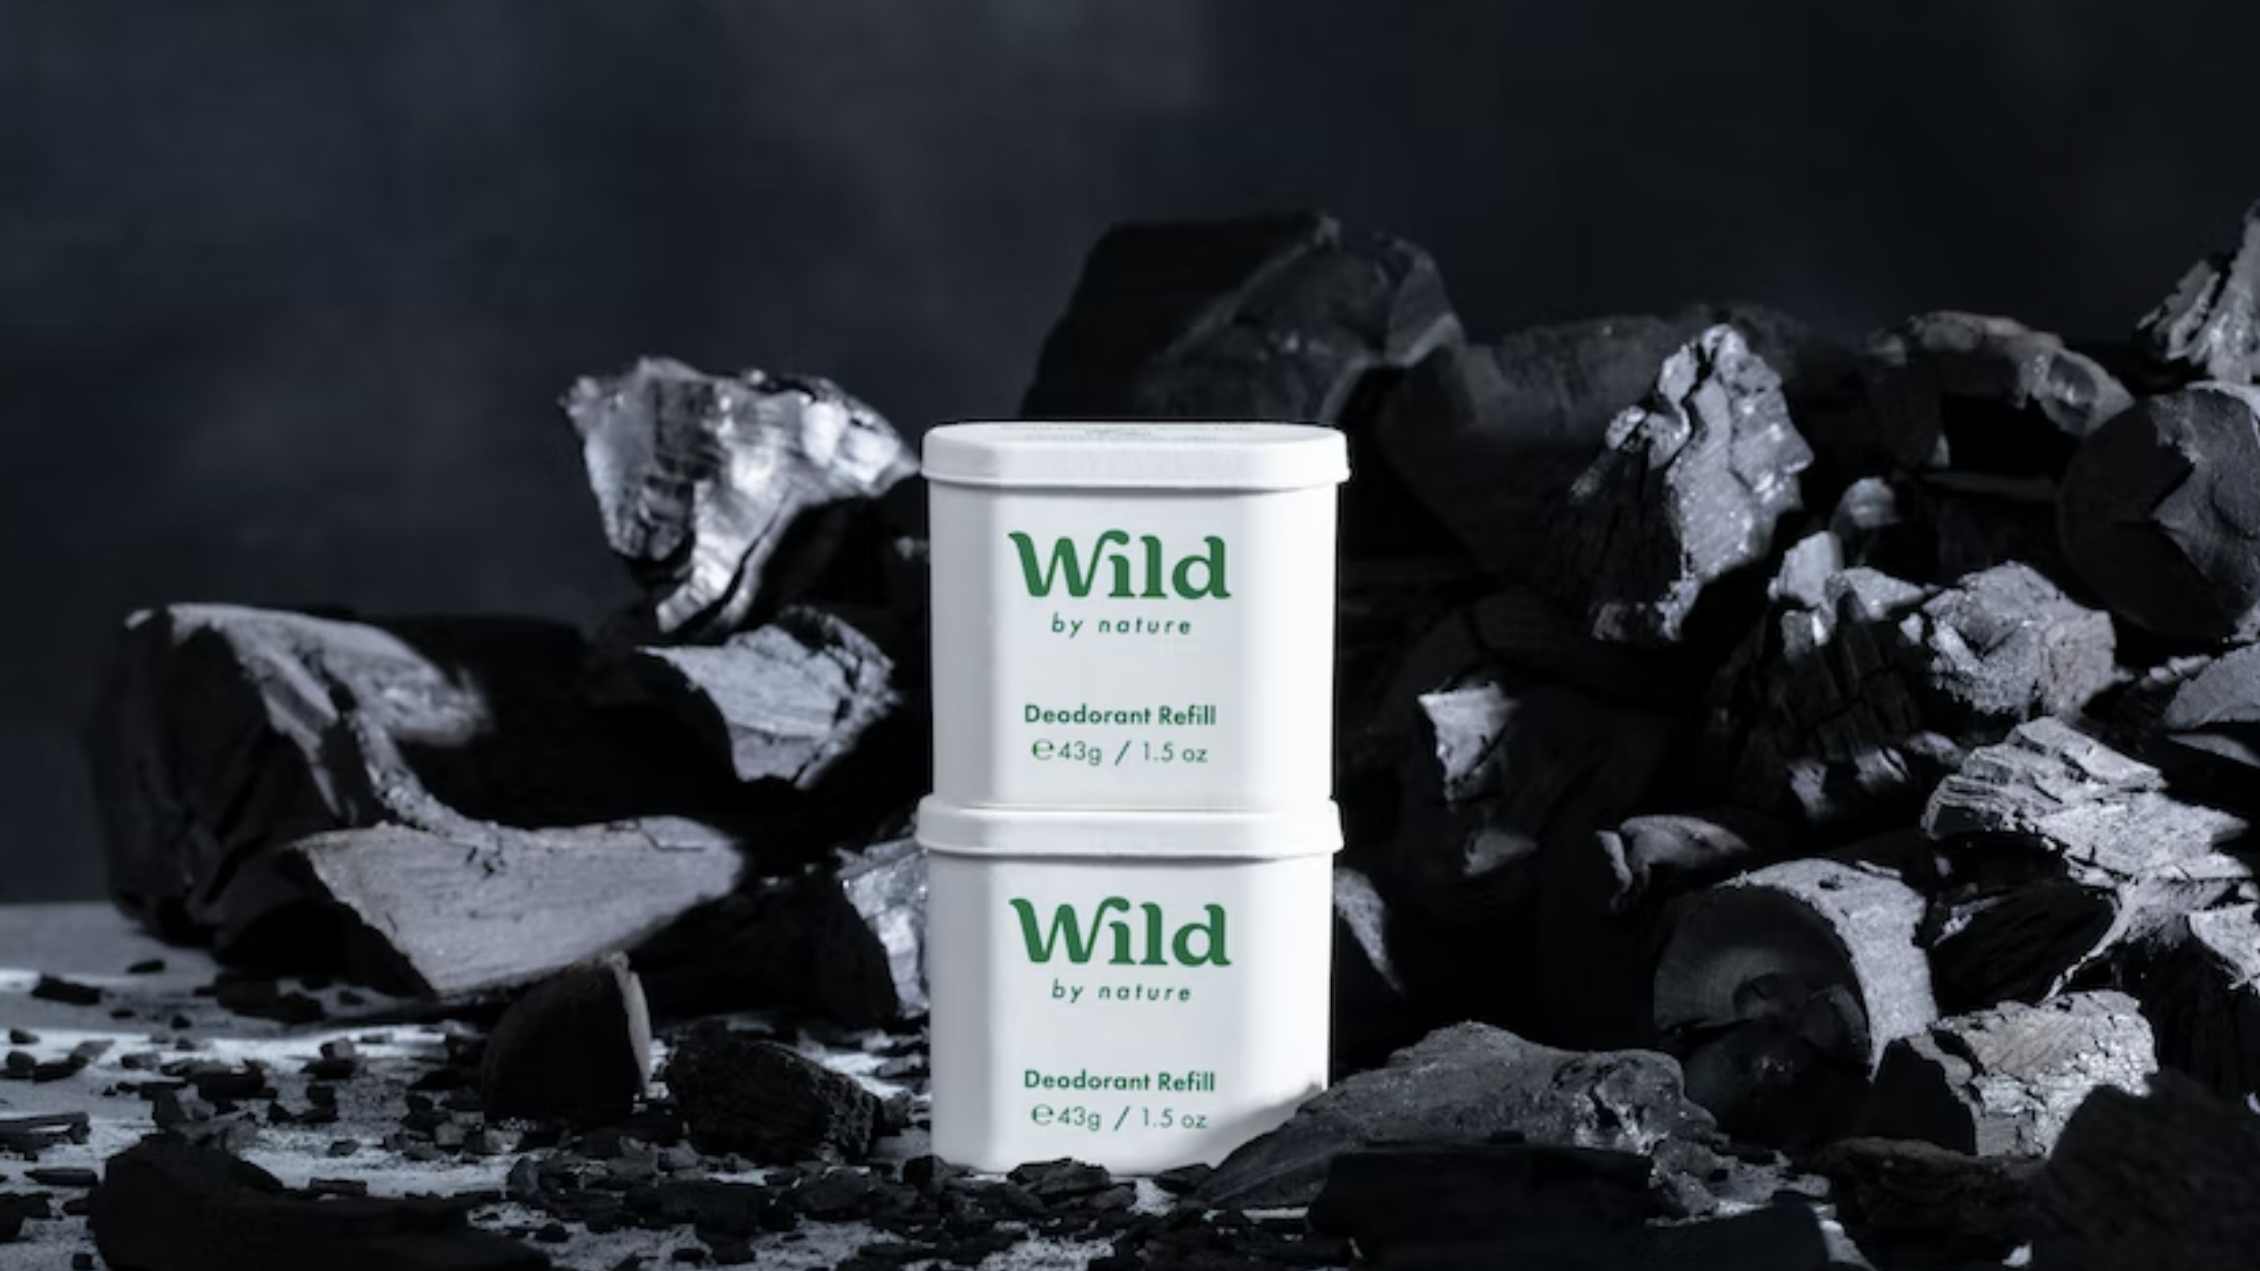 Wild deodorant review: Is the refillable Wild deodorant for men as effective as it claims?